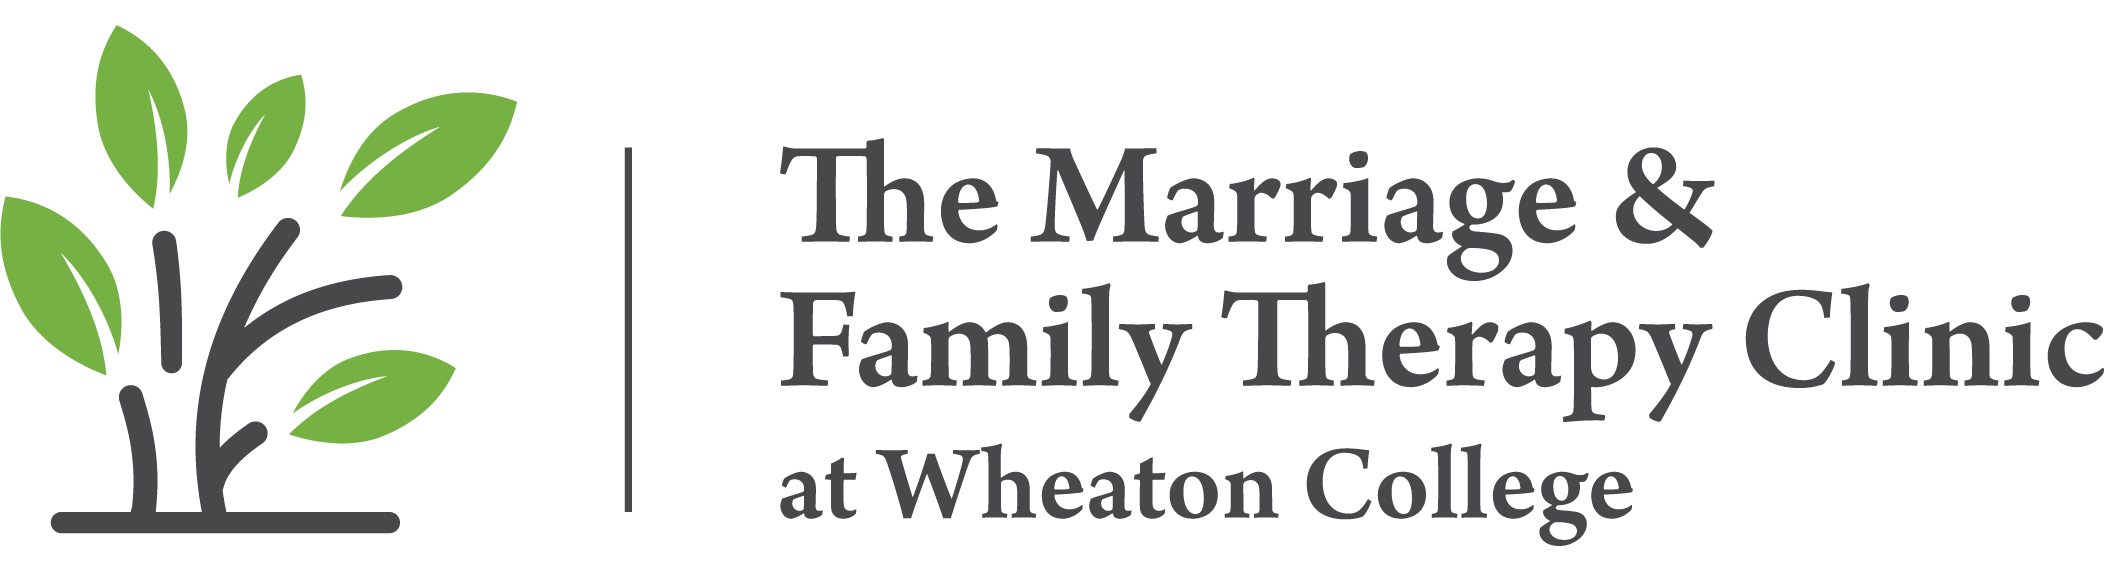 Marriage and Family Therapy Clinic at Wheaton College Logo